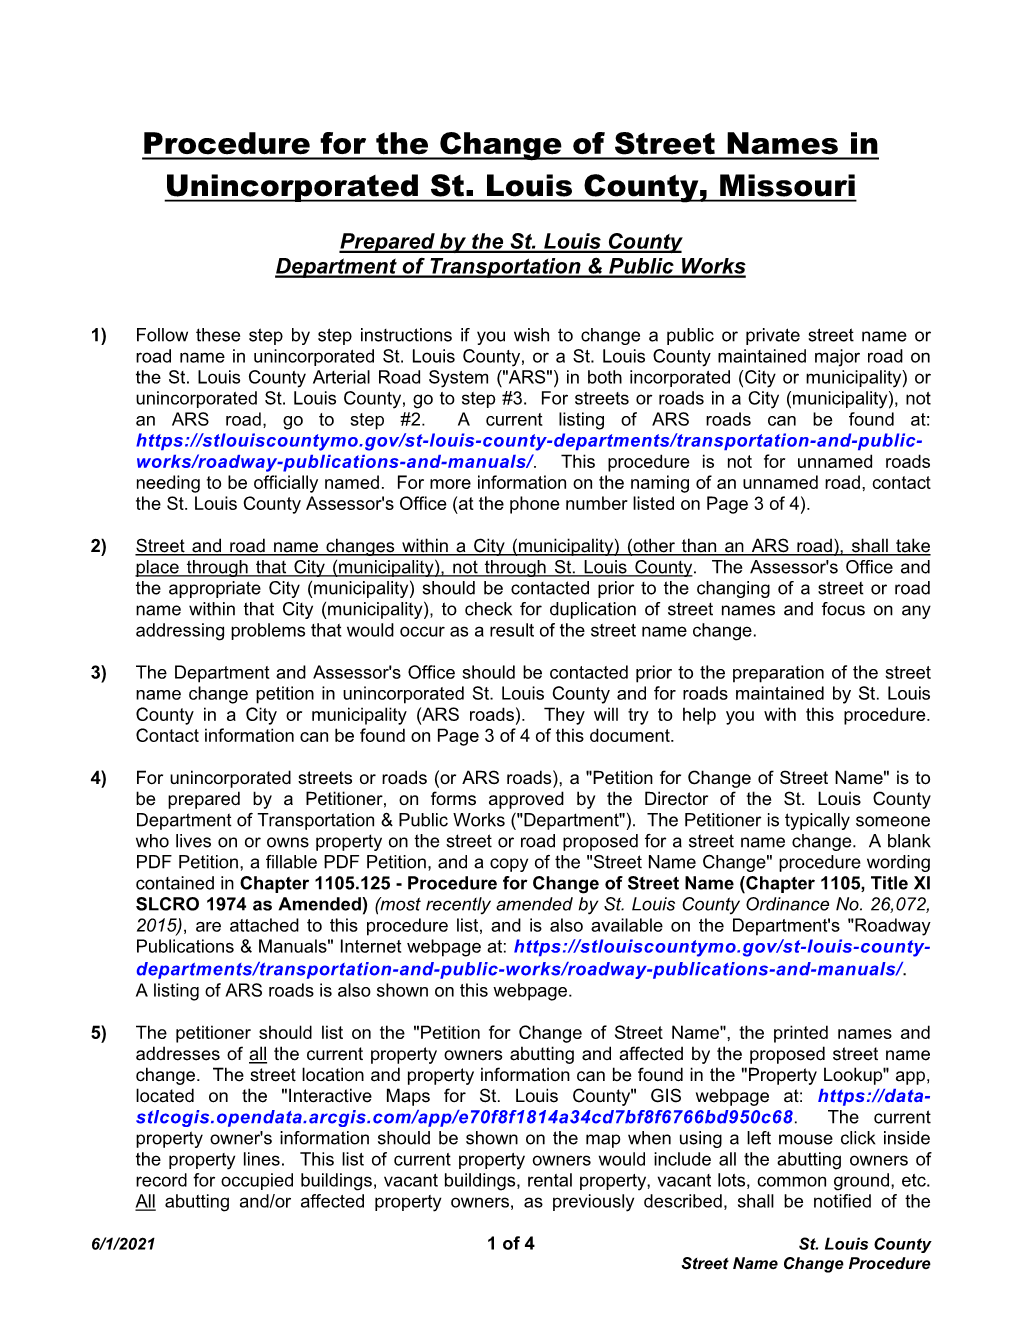 Procedure for the Change of Street Names in Unincorporated St. Louis County, Missouri